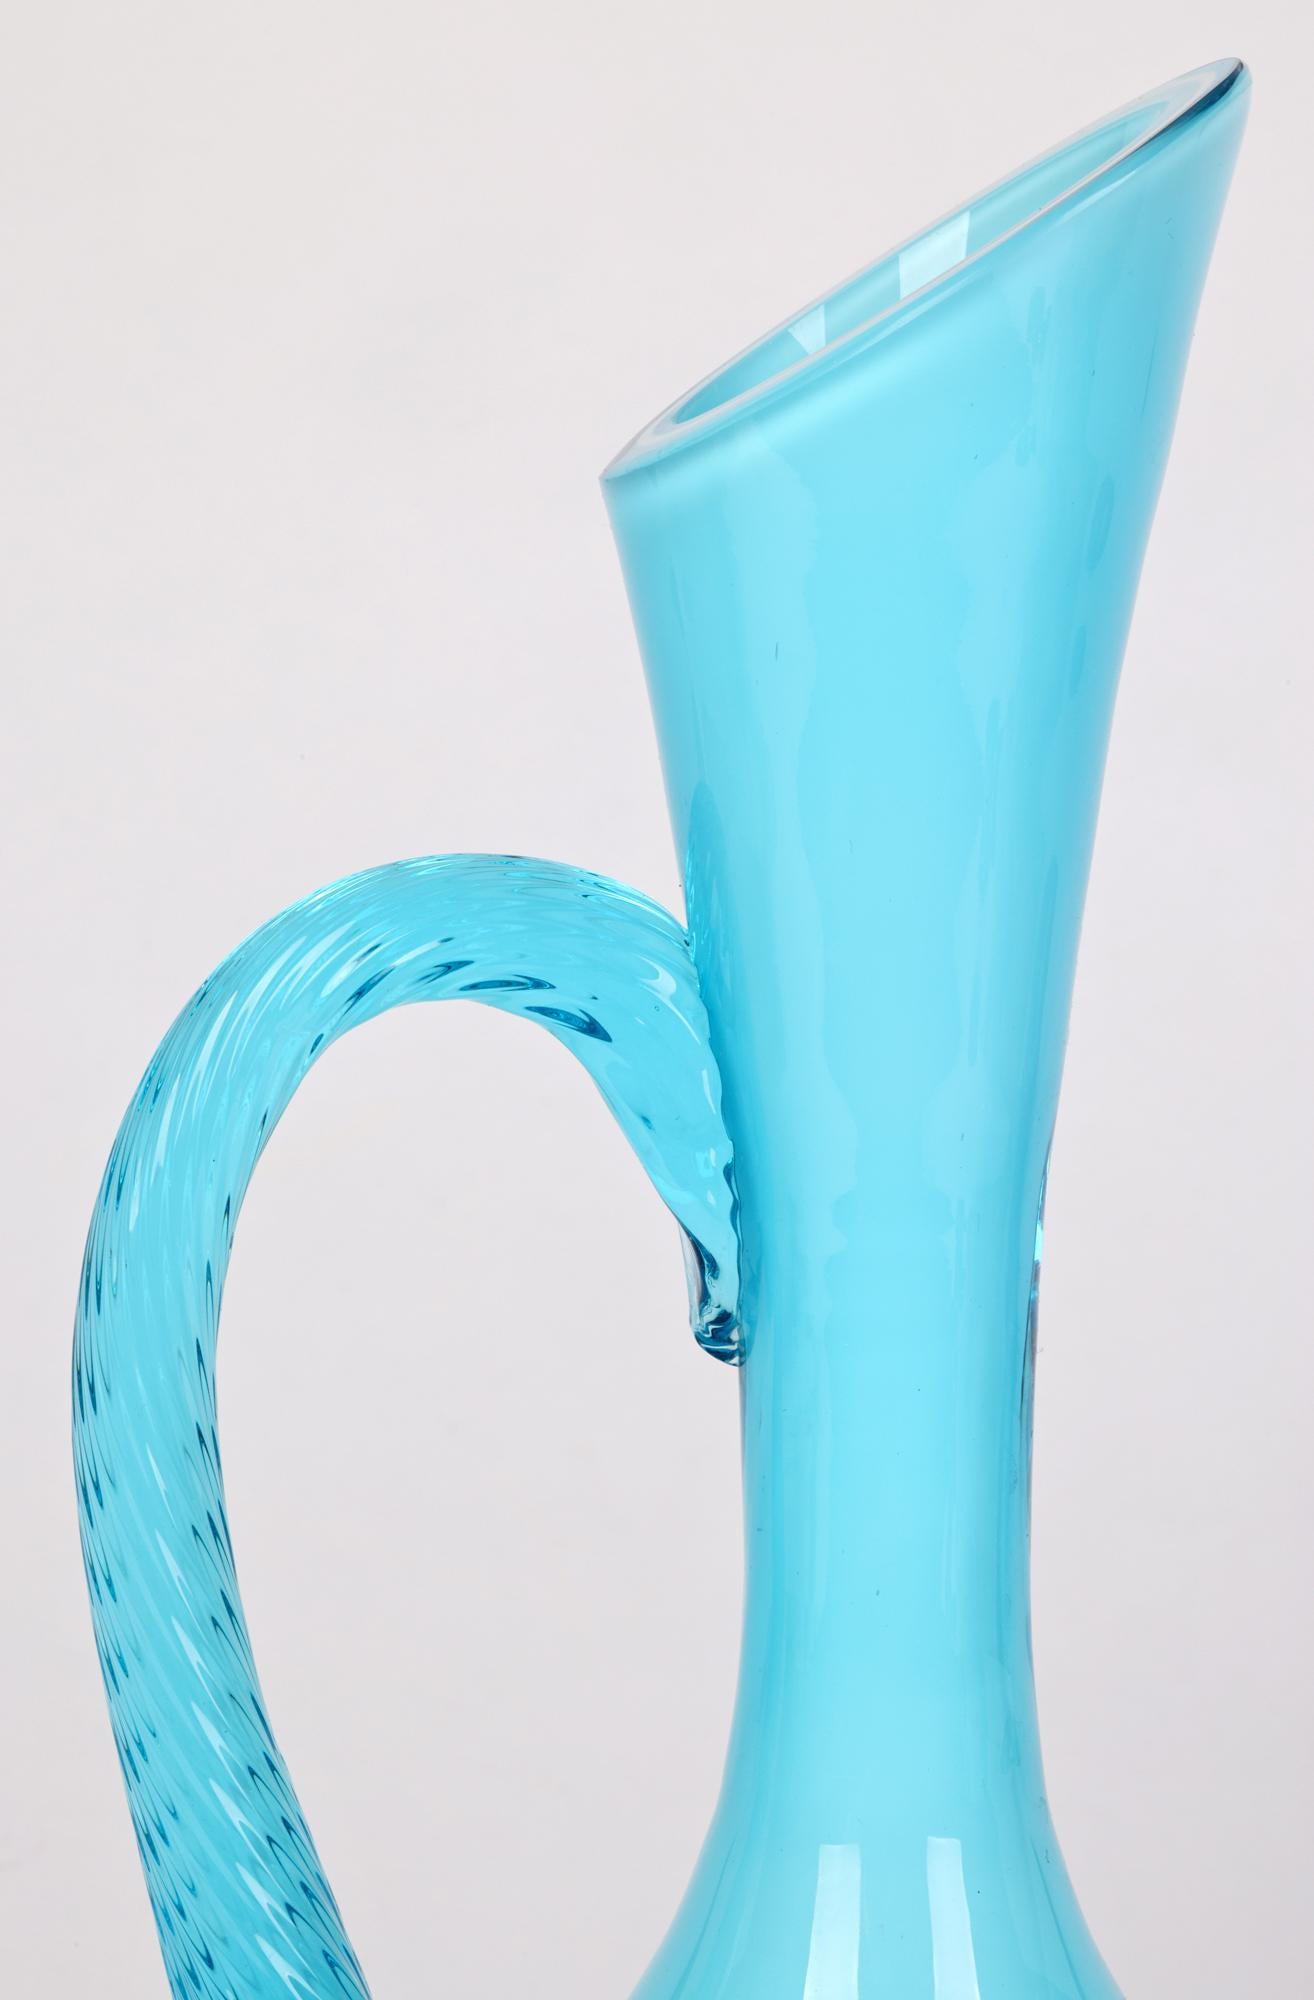 A stylish Italian mid-century turquoise cased art glass jug by Empoli. The jug stands on a flat round base with a rounded bulbous lower body and long slender neck widening towards the top. The top has been slice cut at an angle to form the pouring